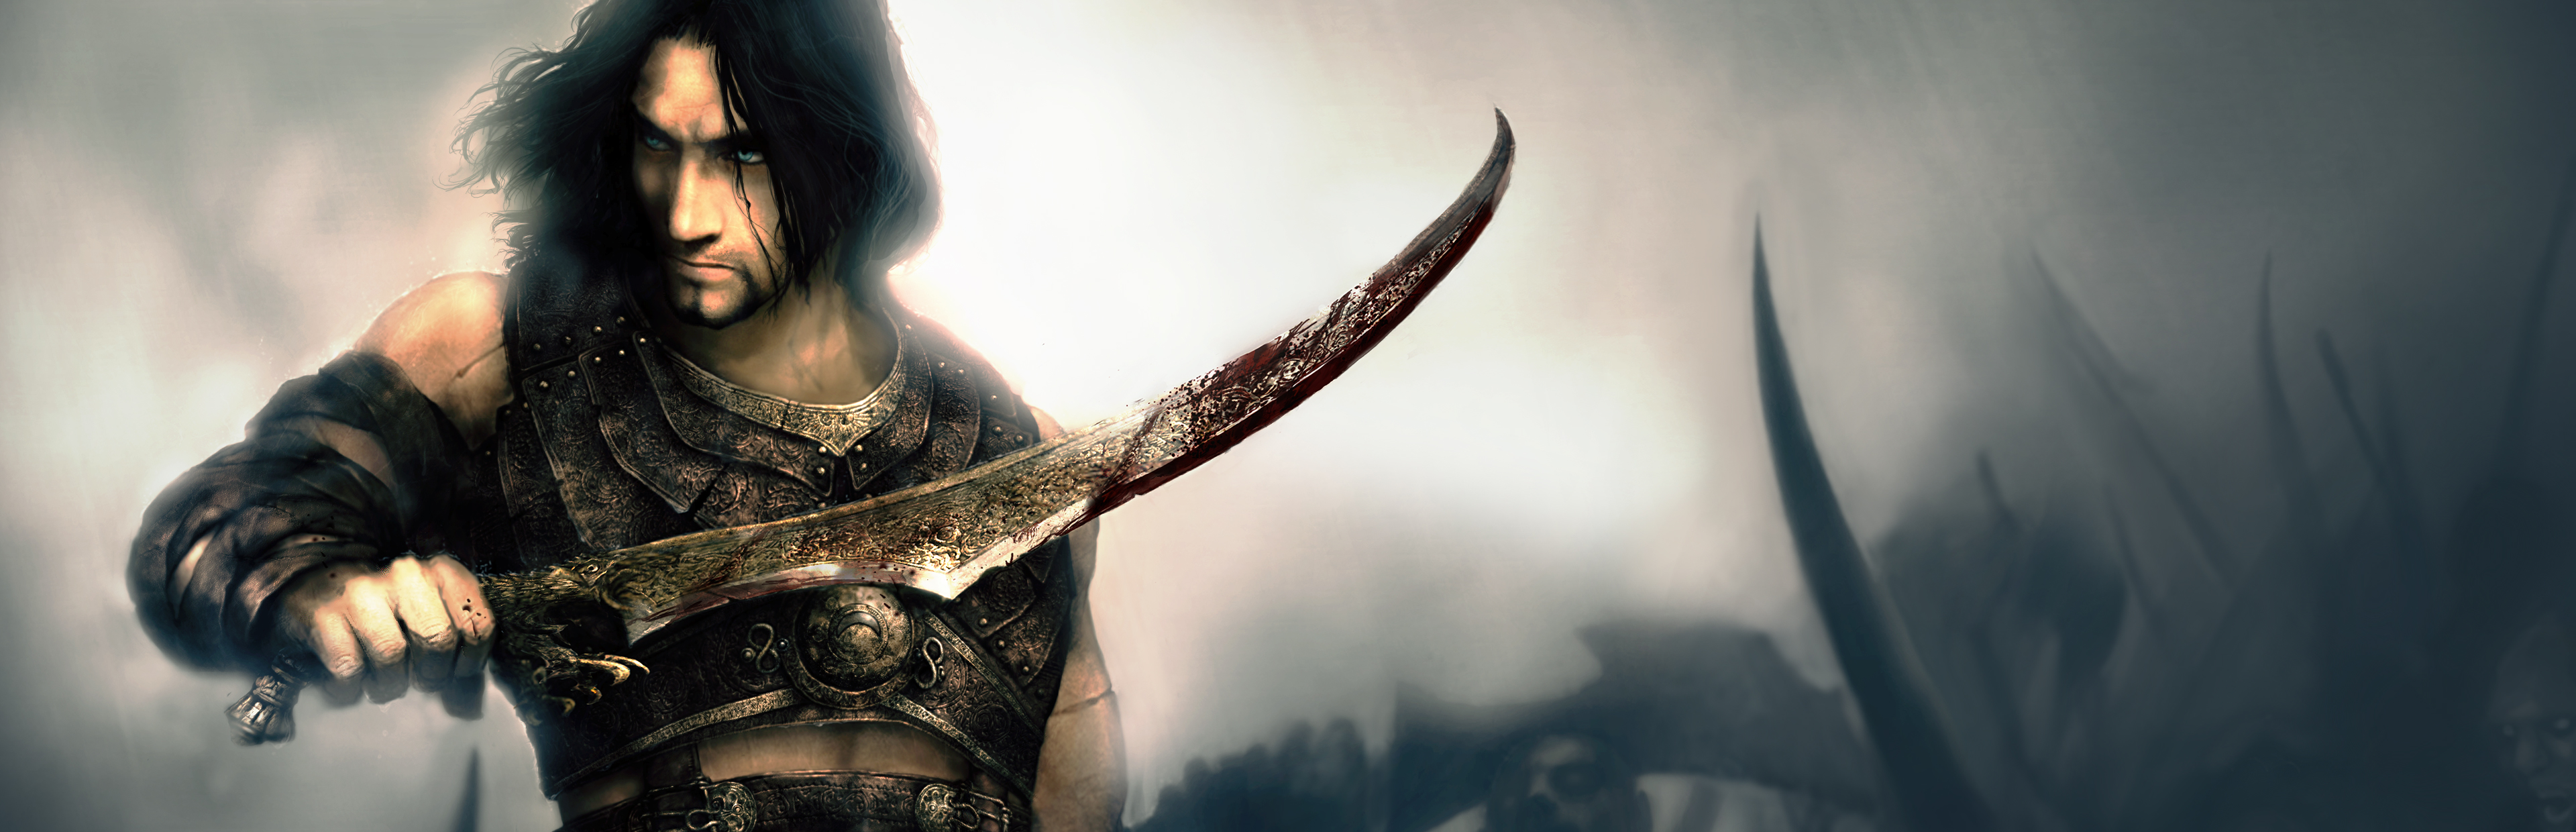 Buy Prince of Persia: Warrior Within™ from the Humble Store and